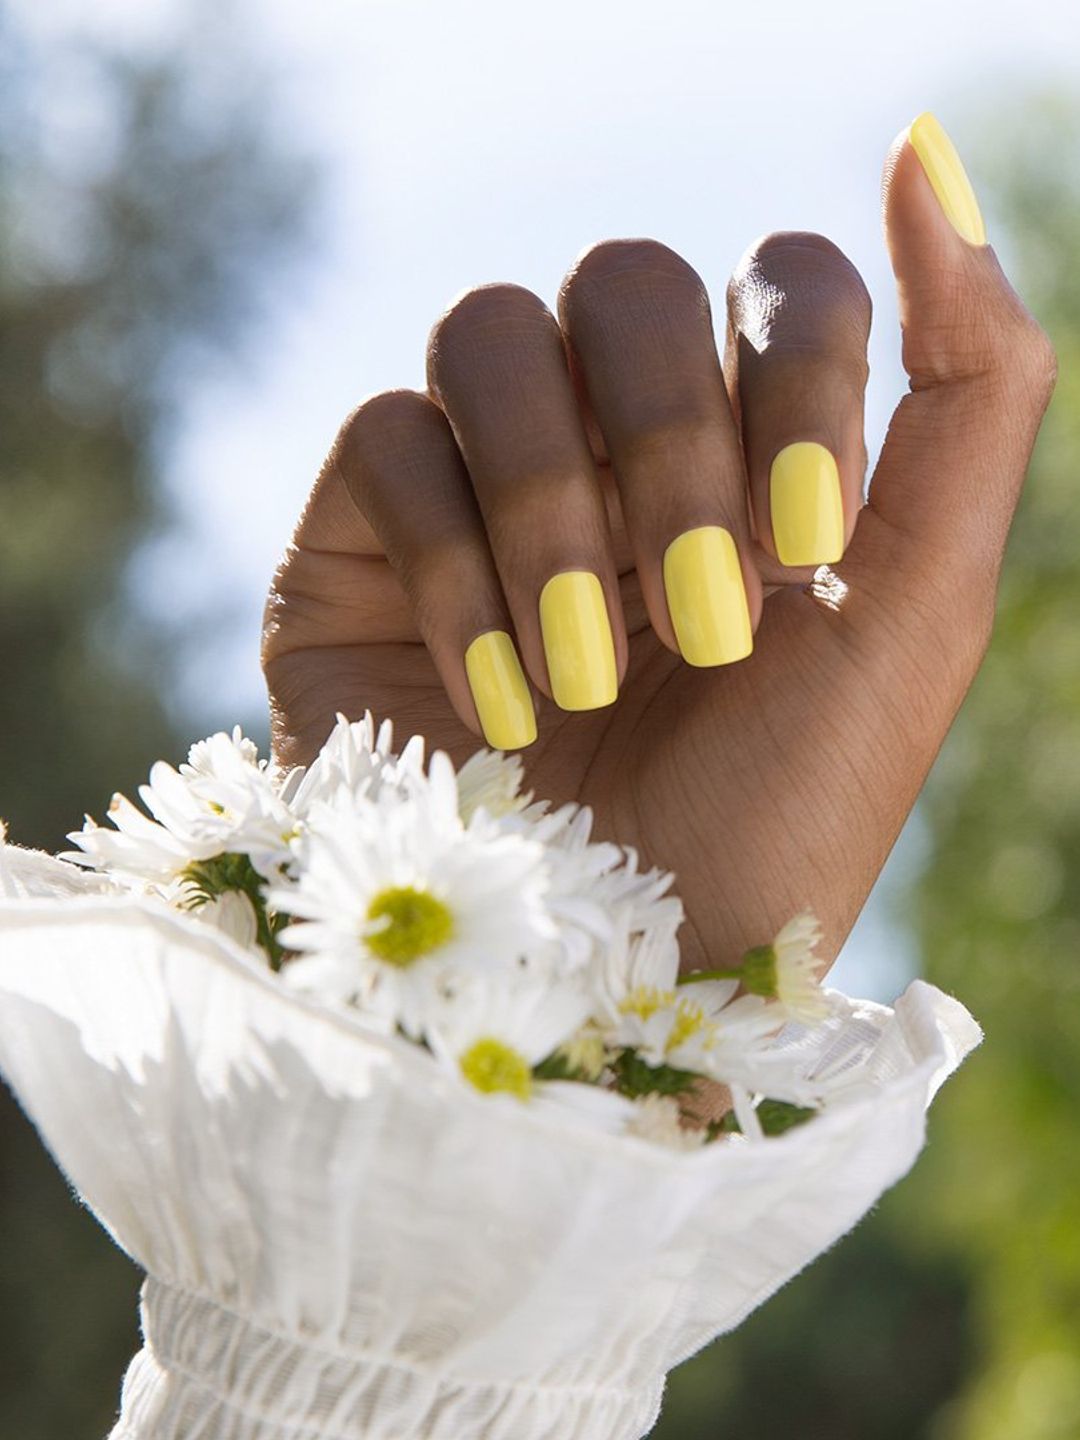 There's a shade of yellow to suit all skintones